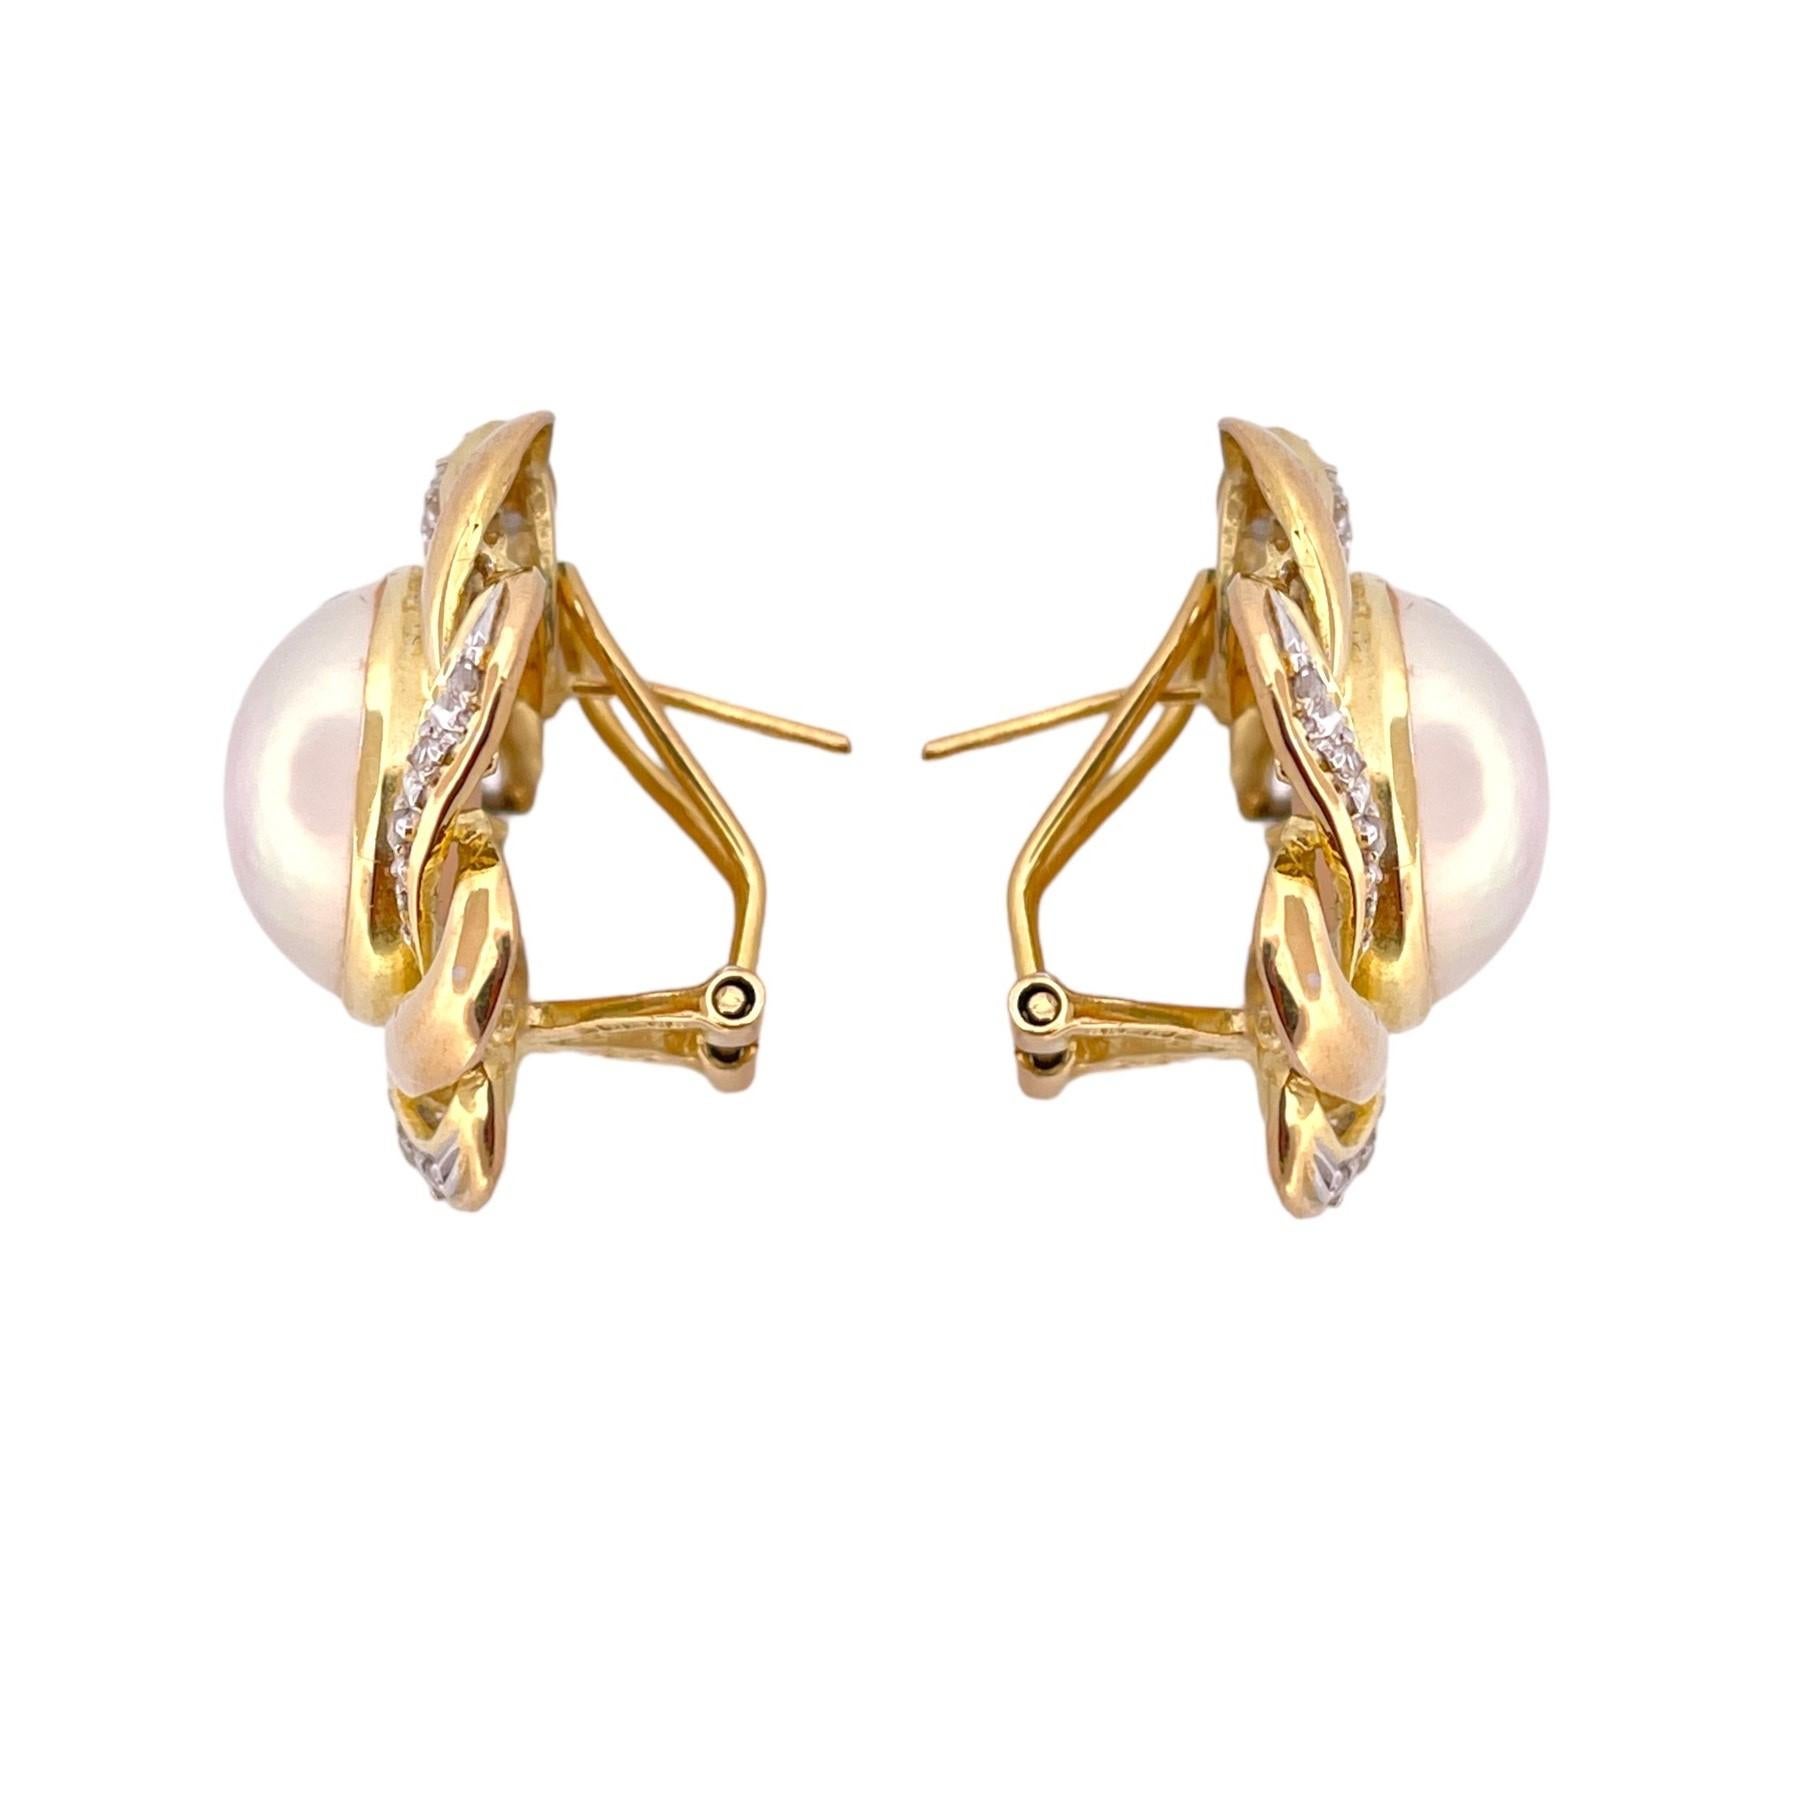 Elevate your elegance with our Mabe Pearl and Diamond Earrings, a mesmerizing blend of sophistication and luxury. These exquisite earrings feature lustrous mabe pearls and brilliant diamonds, all set in radiant 14K yellow gold, creating a truly